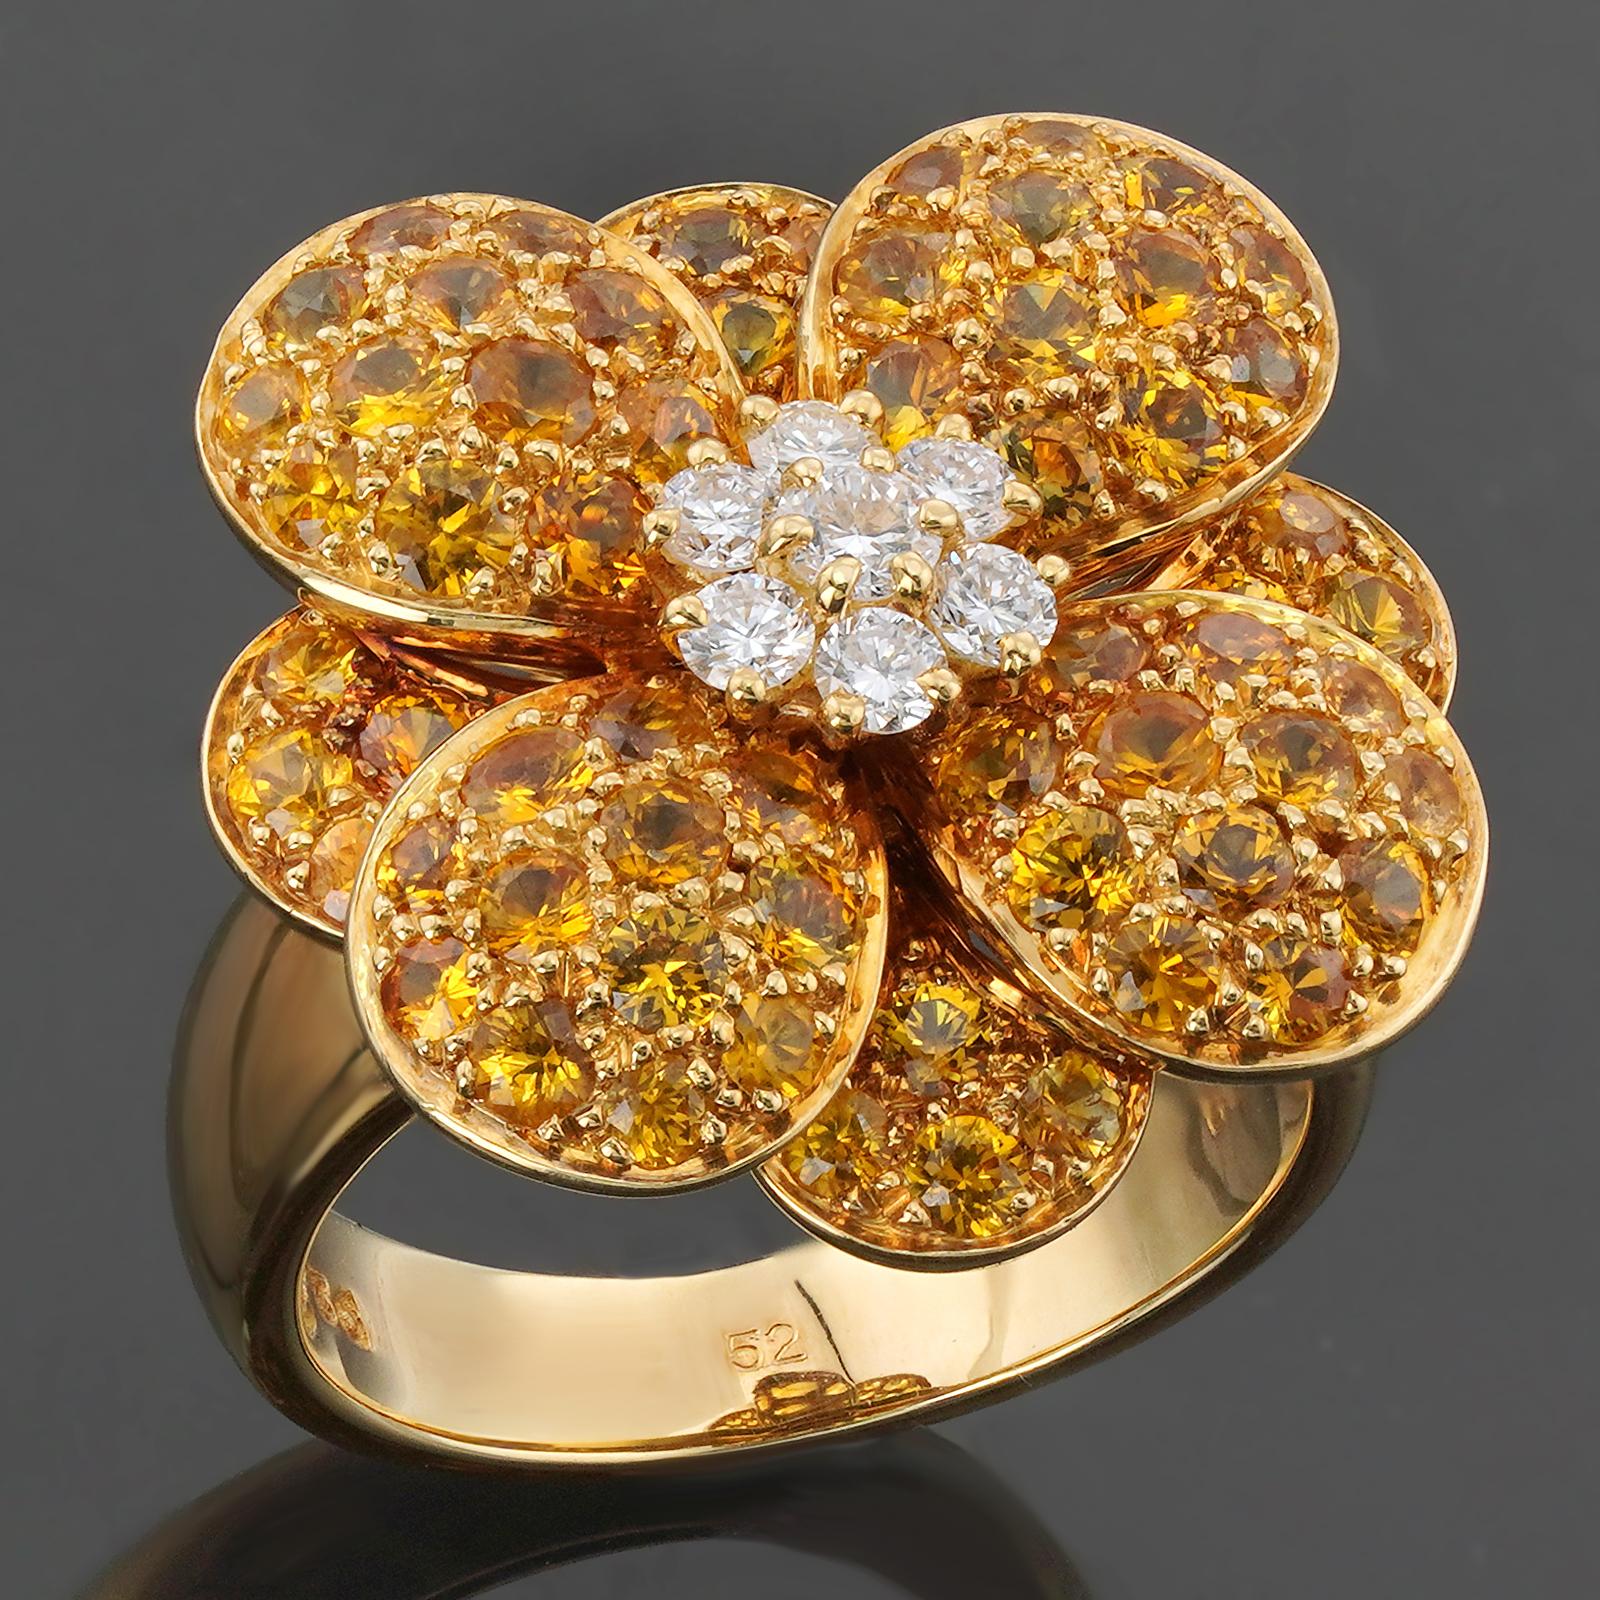 This stunning authentic Van Cleef & Arpels ring features a vibrant flower design crafted in 18k yellow gold and set with yellow sapphires and round brilliant E-F-G VVS1-VVS2 diamonds. Made in France circa 1990s. Measurements: 0.78